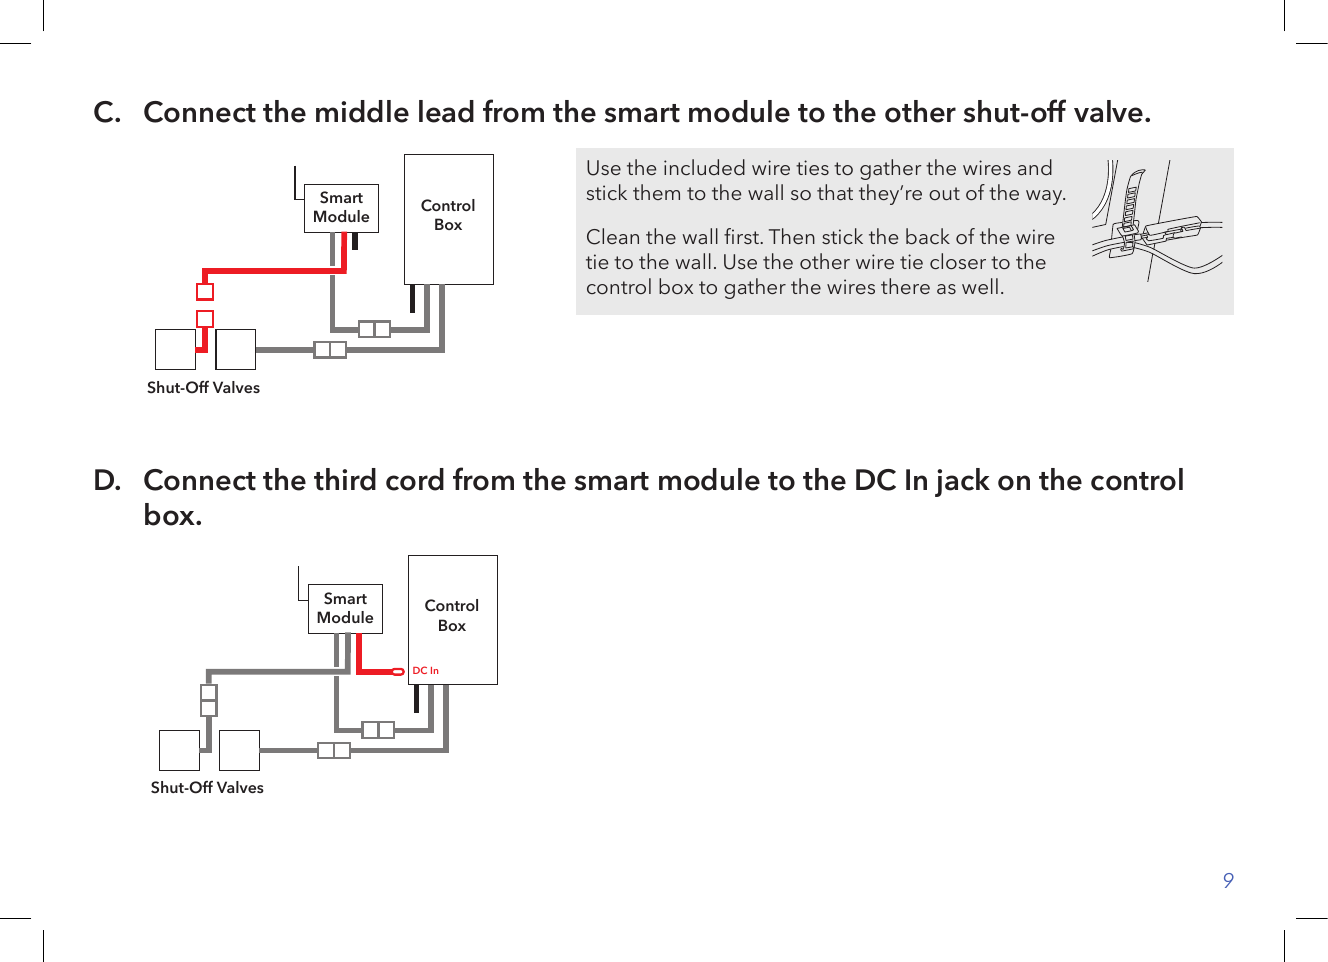 9C.   Connect the middle lead from the smart module to the other shut-off valve.ControlBoxShut-Off ValvesSmartModuleD.   Connect the third cord from the smart module to the DC In jack on the control box.ControlBoxShut-Off ValvesSmartModuleDC InUse the included wire ties to gather the wires and stick them to the wall so that they’re out of the way.Clean the wall rst. Then stick the back of the wire tie to the wall. Use the other wire tie closer to the control box to gather the wires there as well.